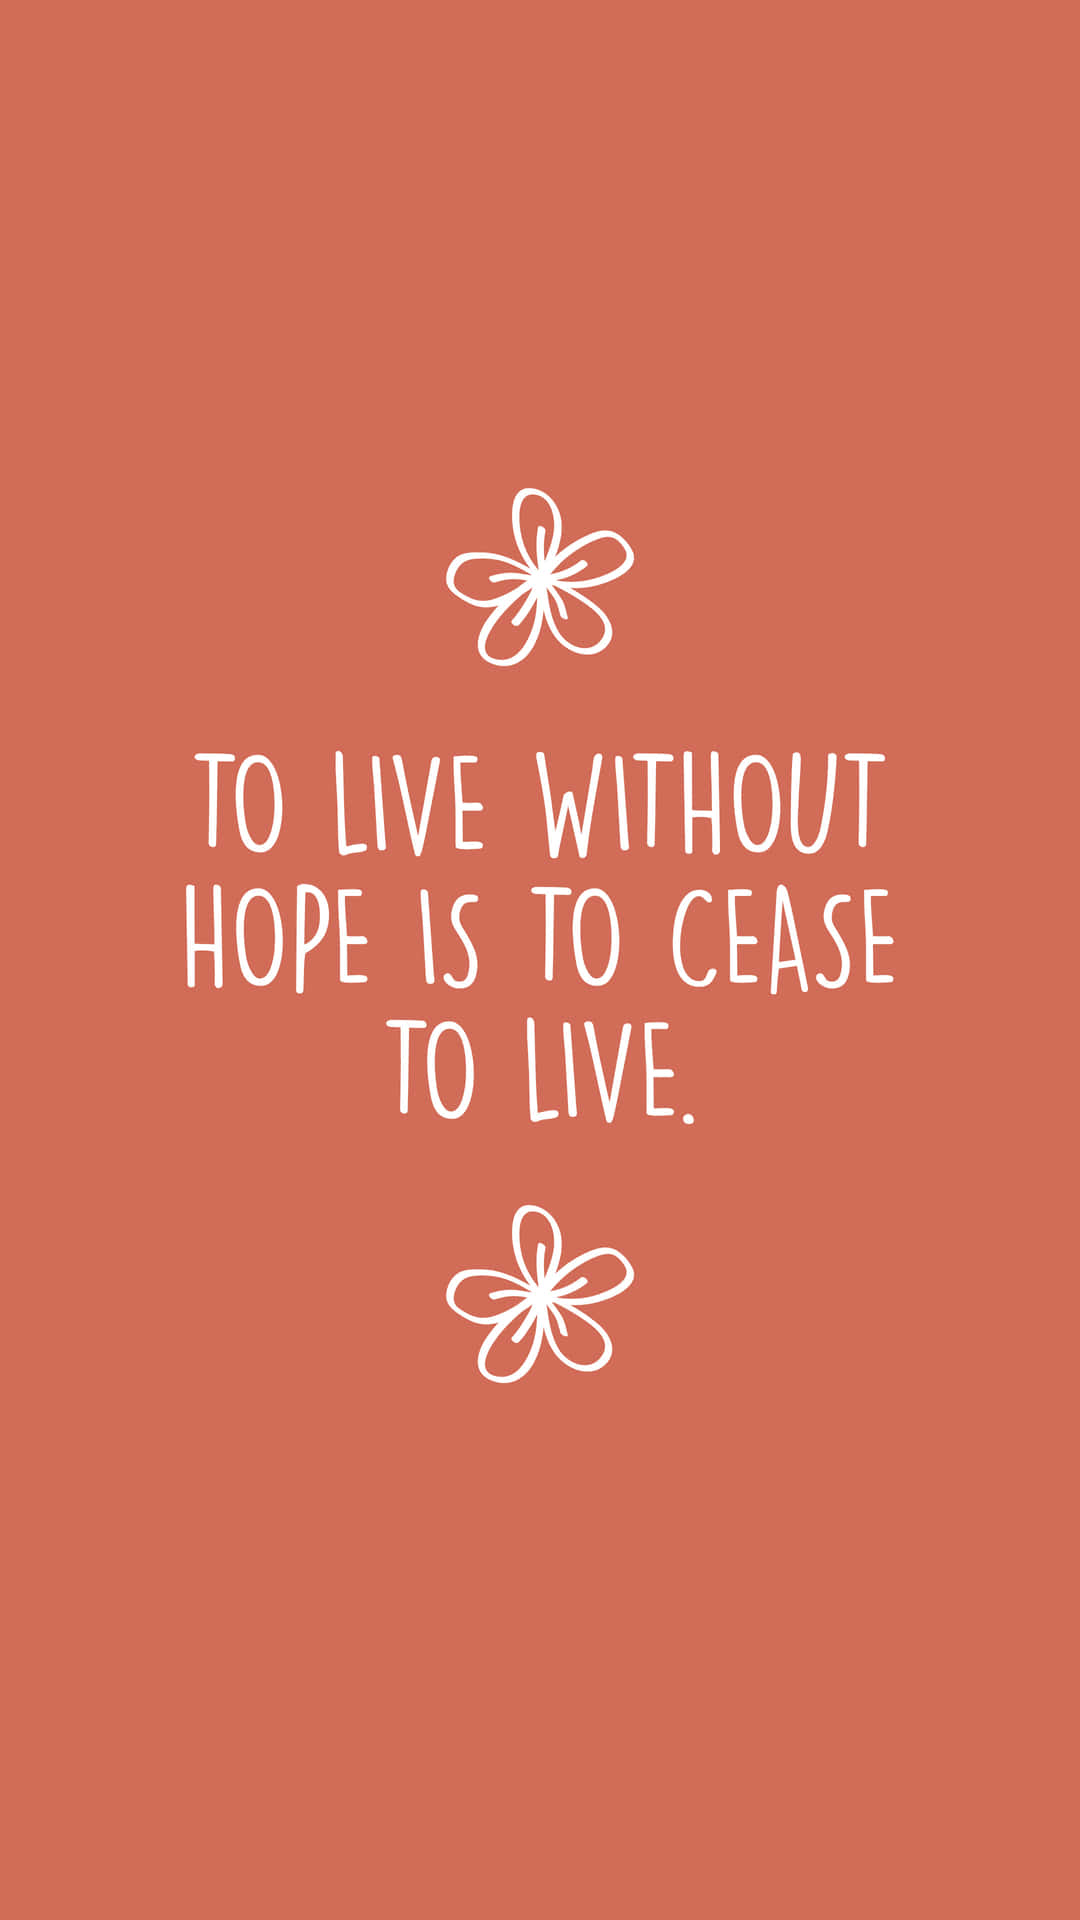 Hope Quote In Salmon Orange Background Background